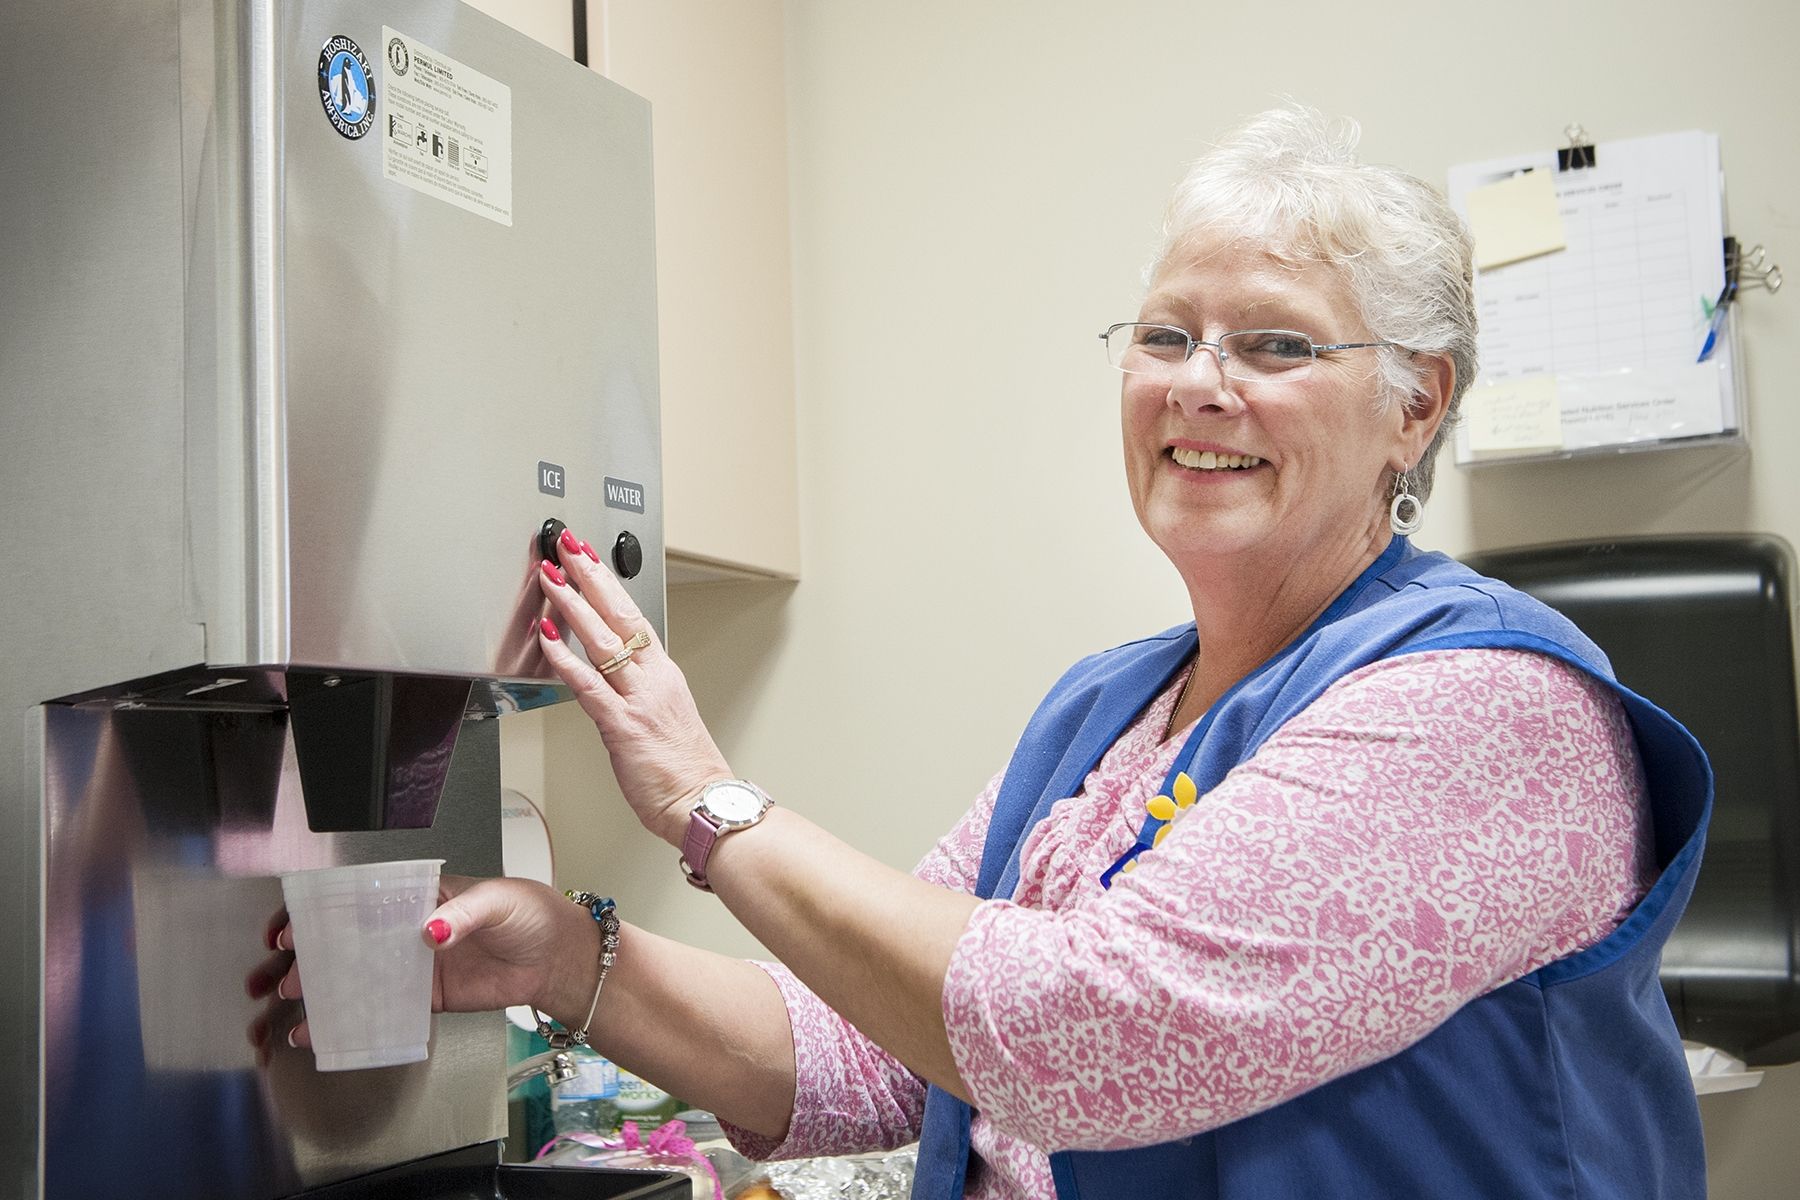 Volunteer Judy Torrents regularly delivers ice water to chemotherapy patients.